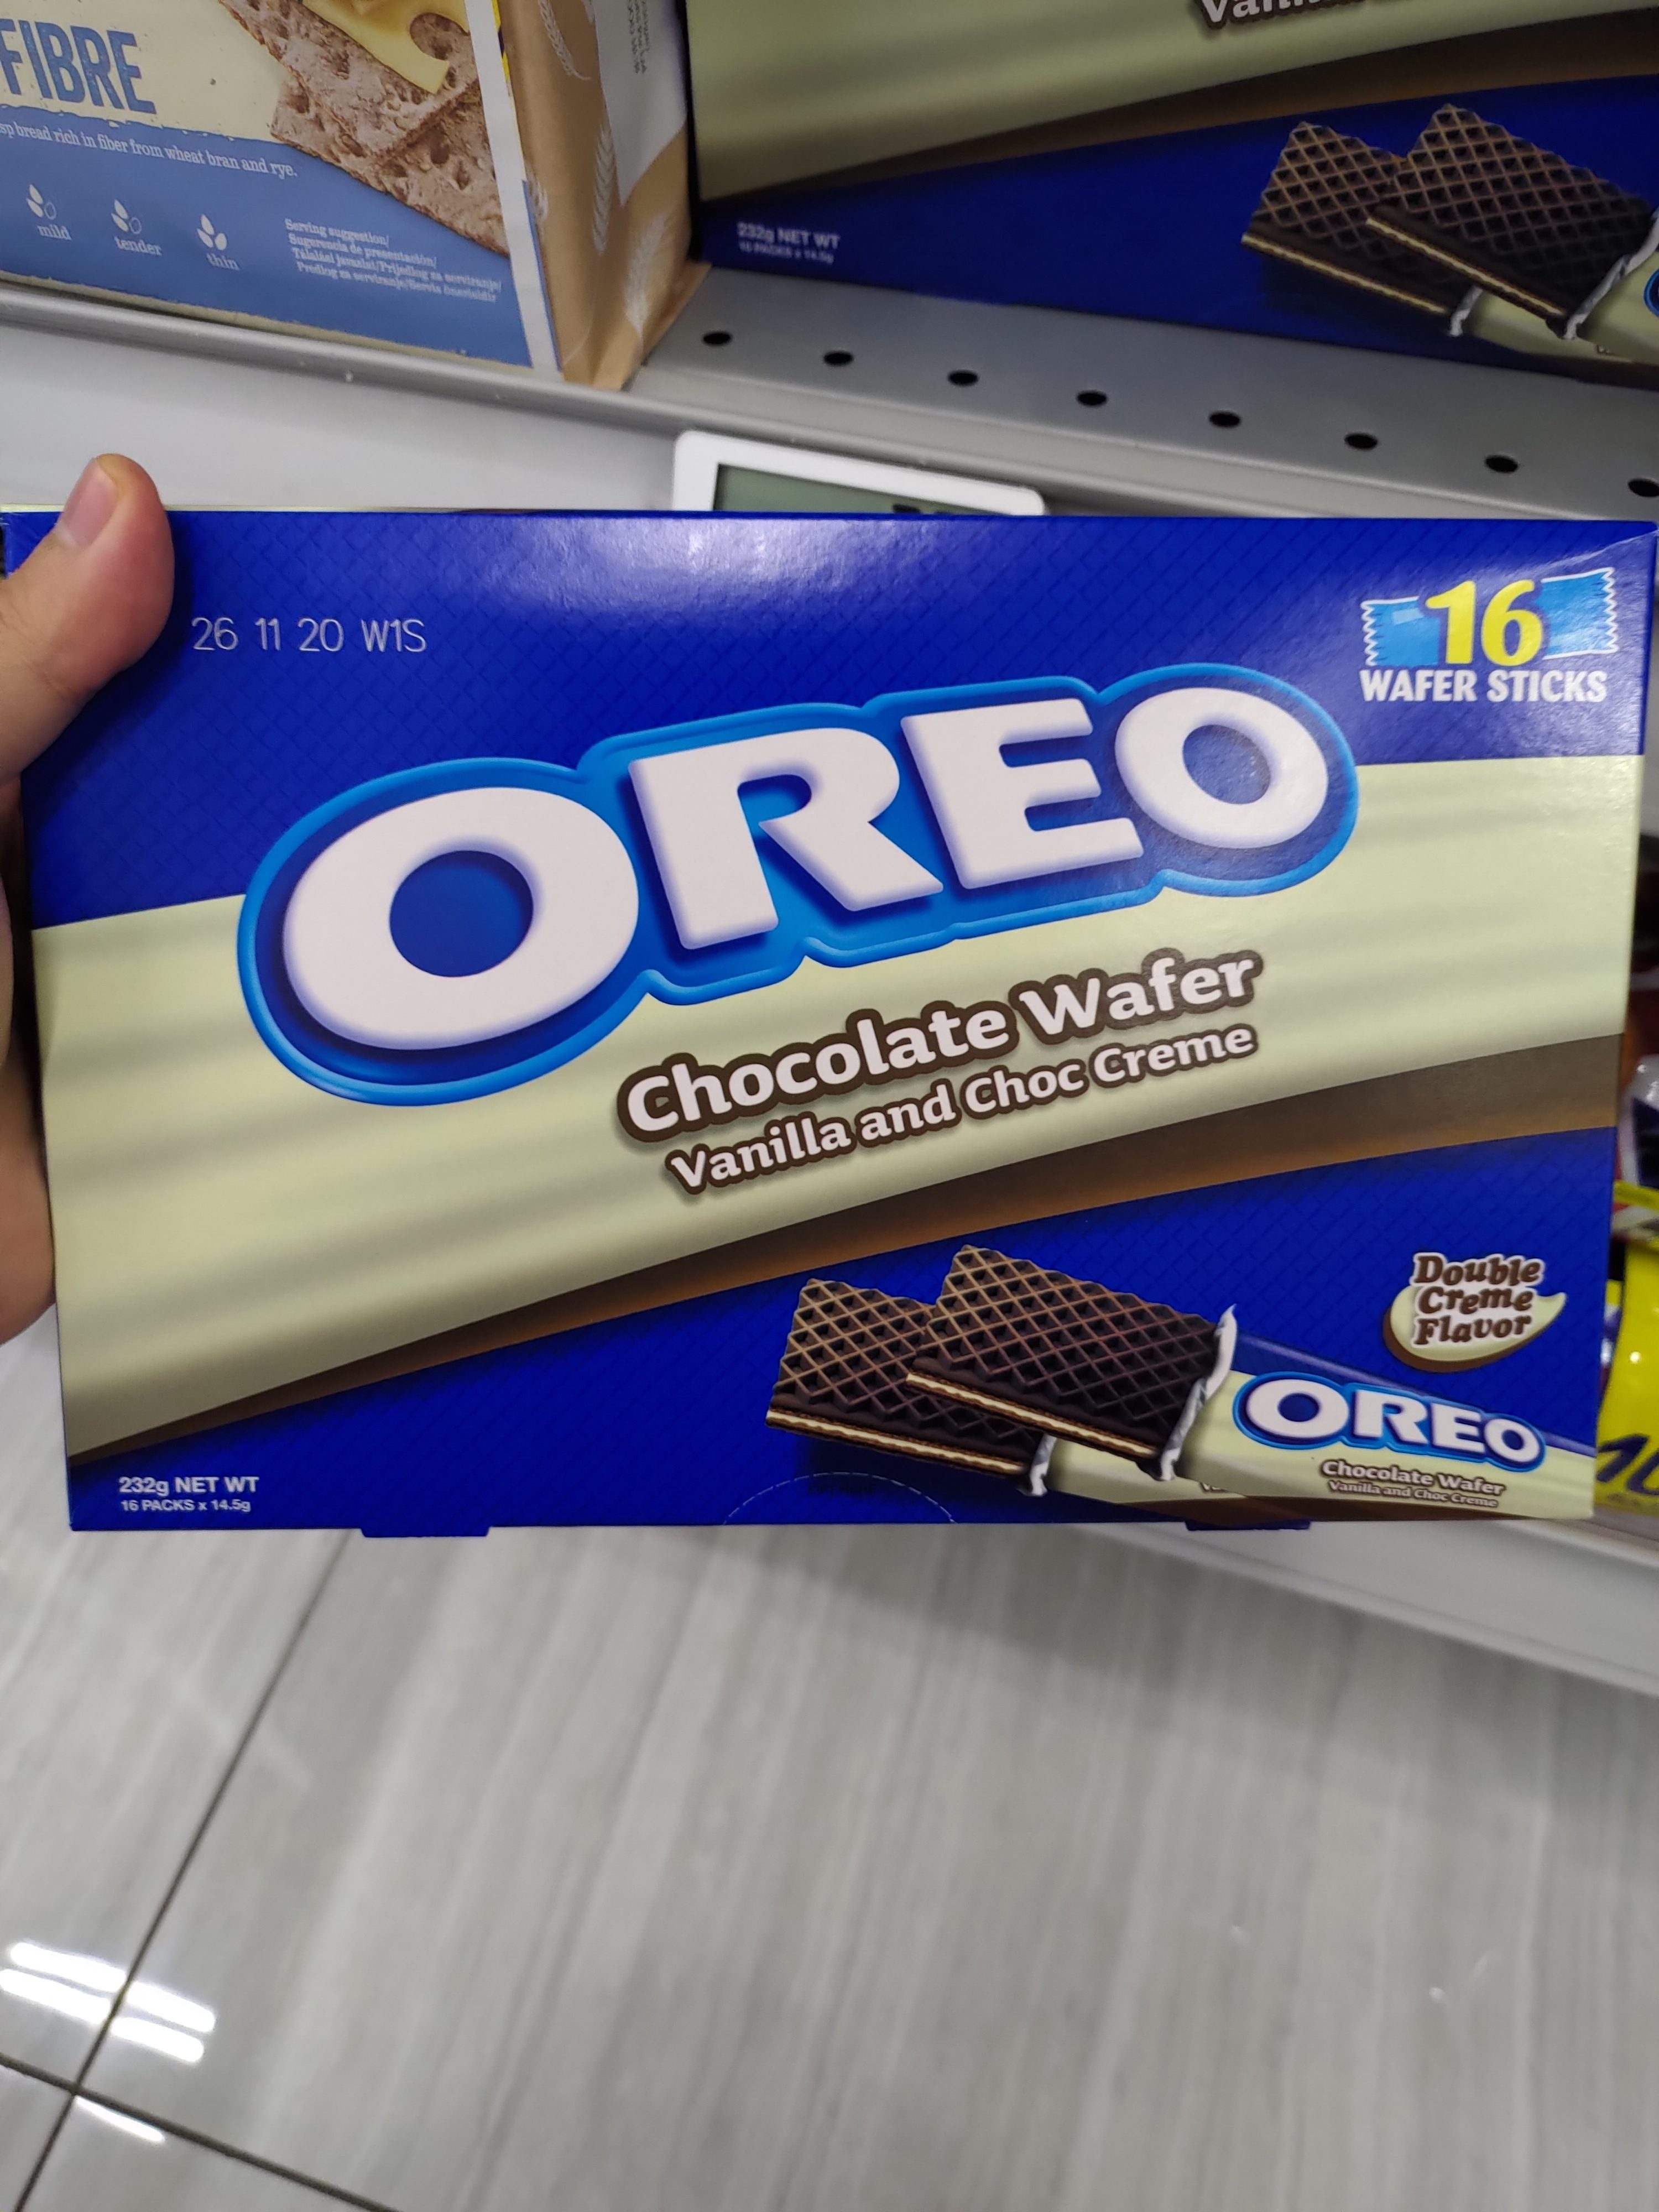 Oreo Chocolate Wafer Sticks Now Available At FairPrice For $3.70 - 2